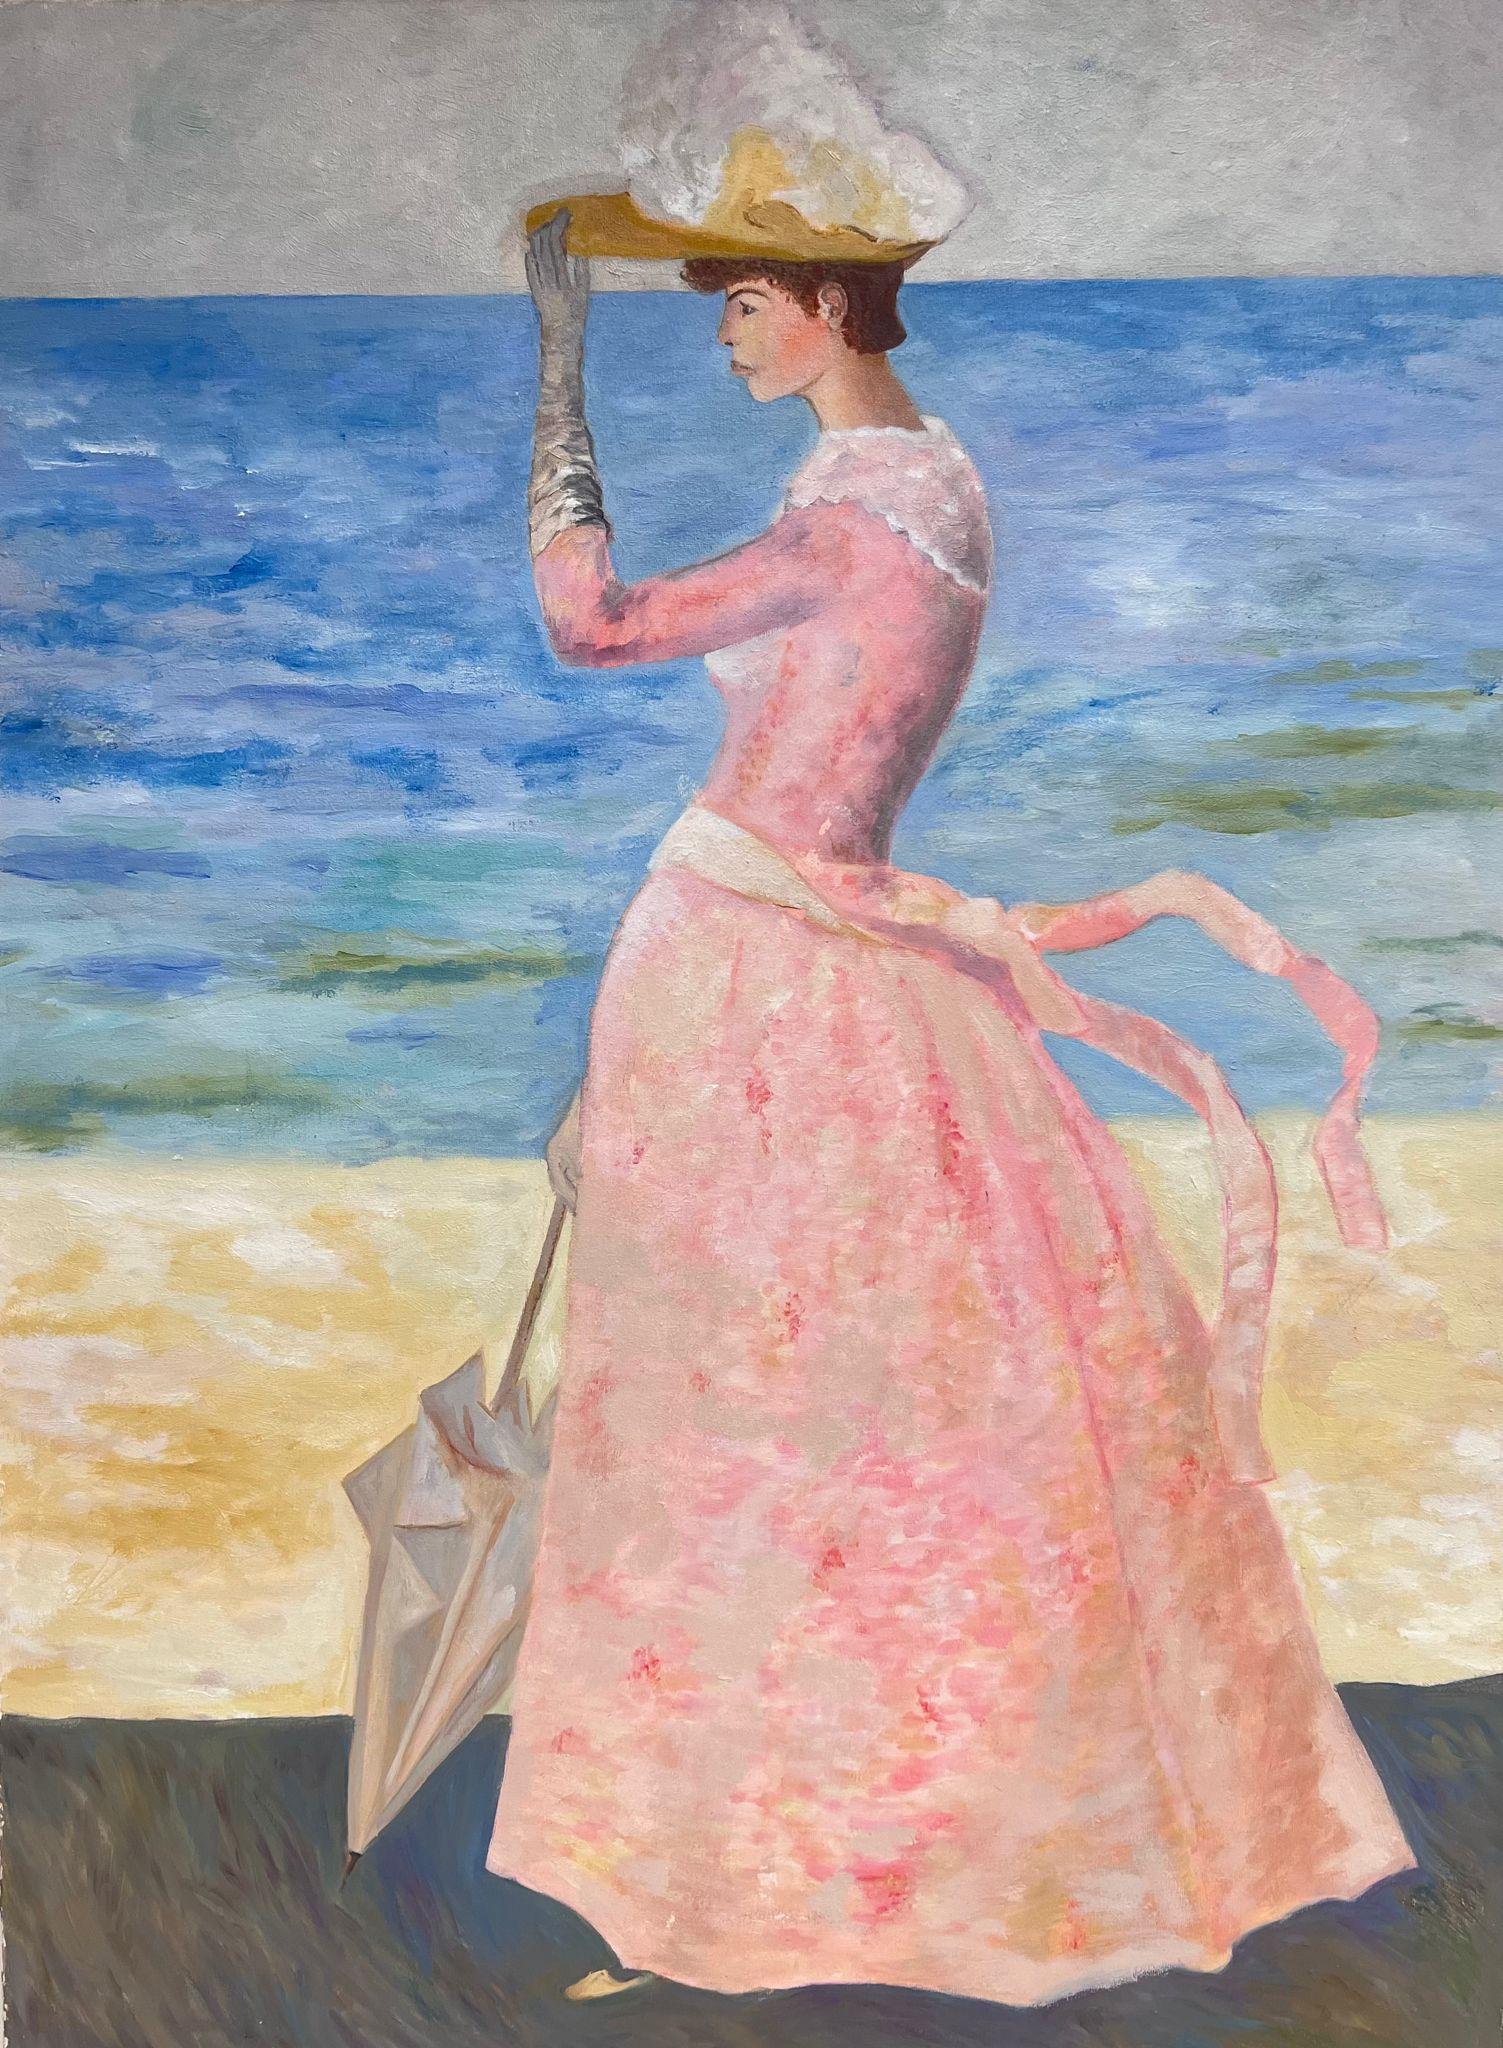 French School  Figurative Painting - Portrait of Elegant Lady in Pink Dress with Parasol by Beach Original French Oil